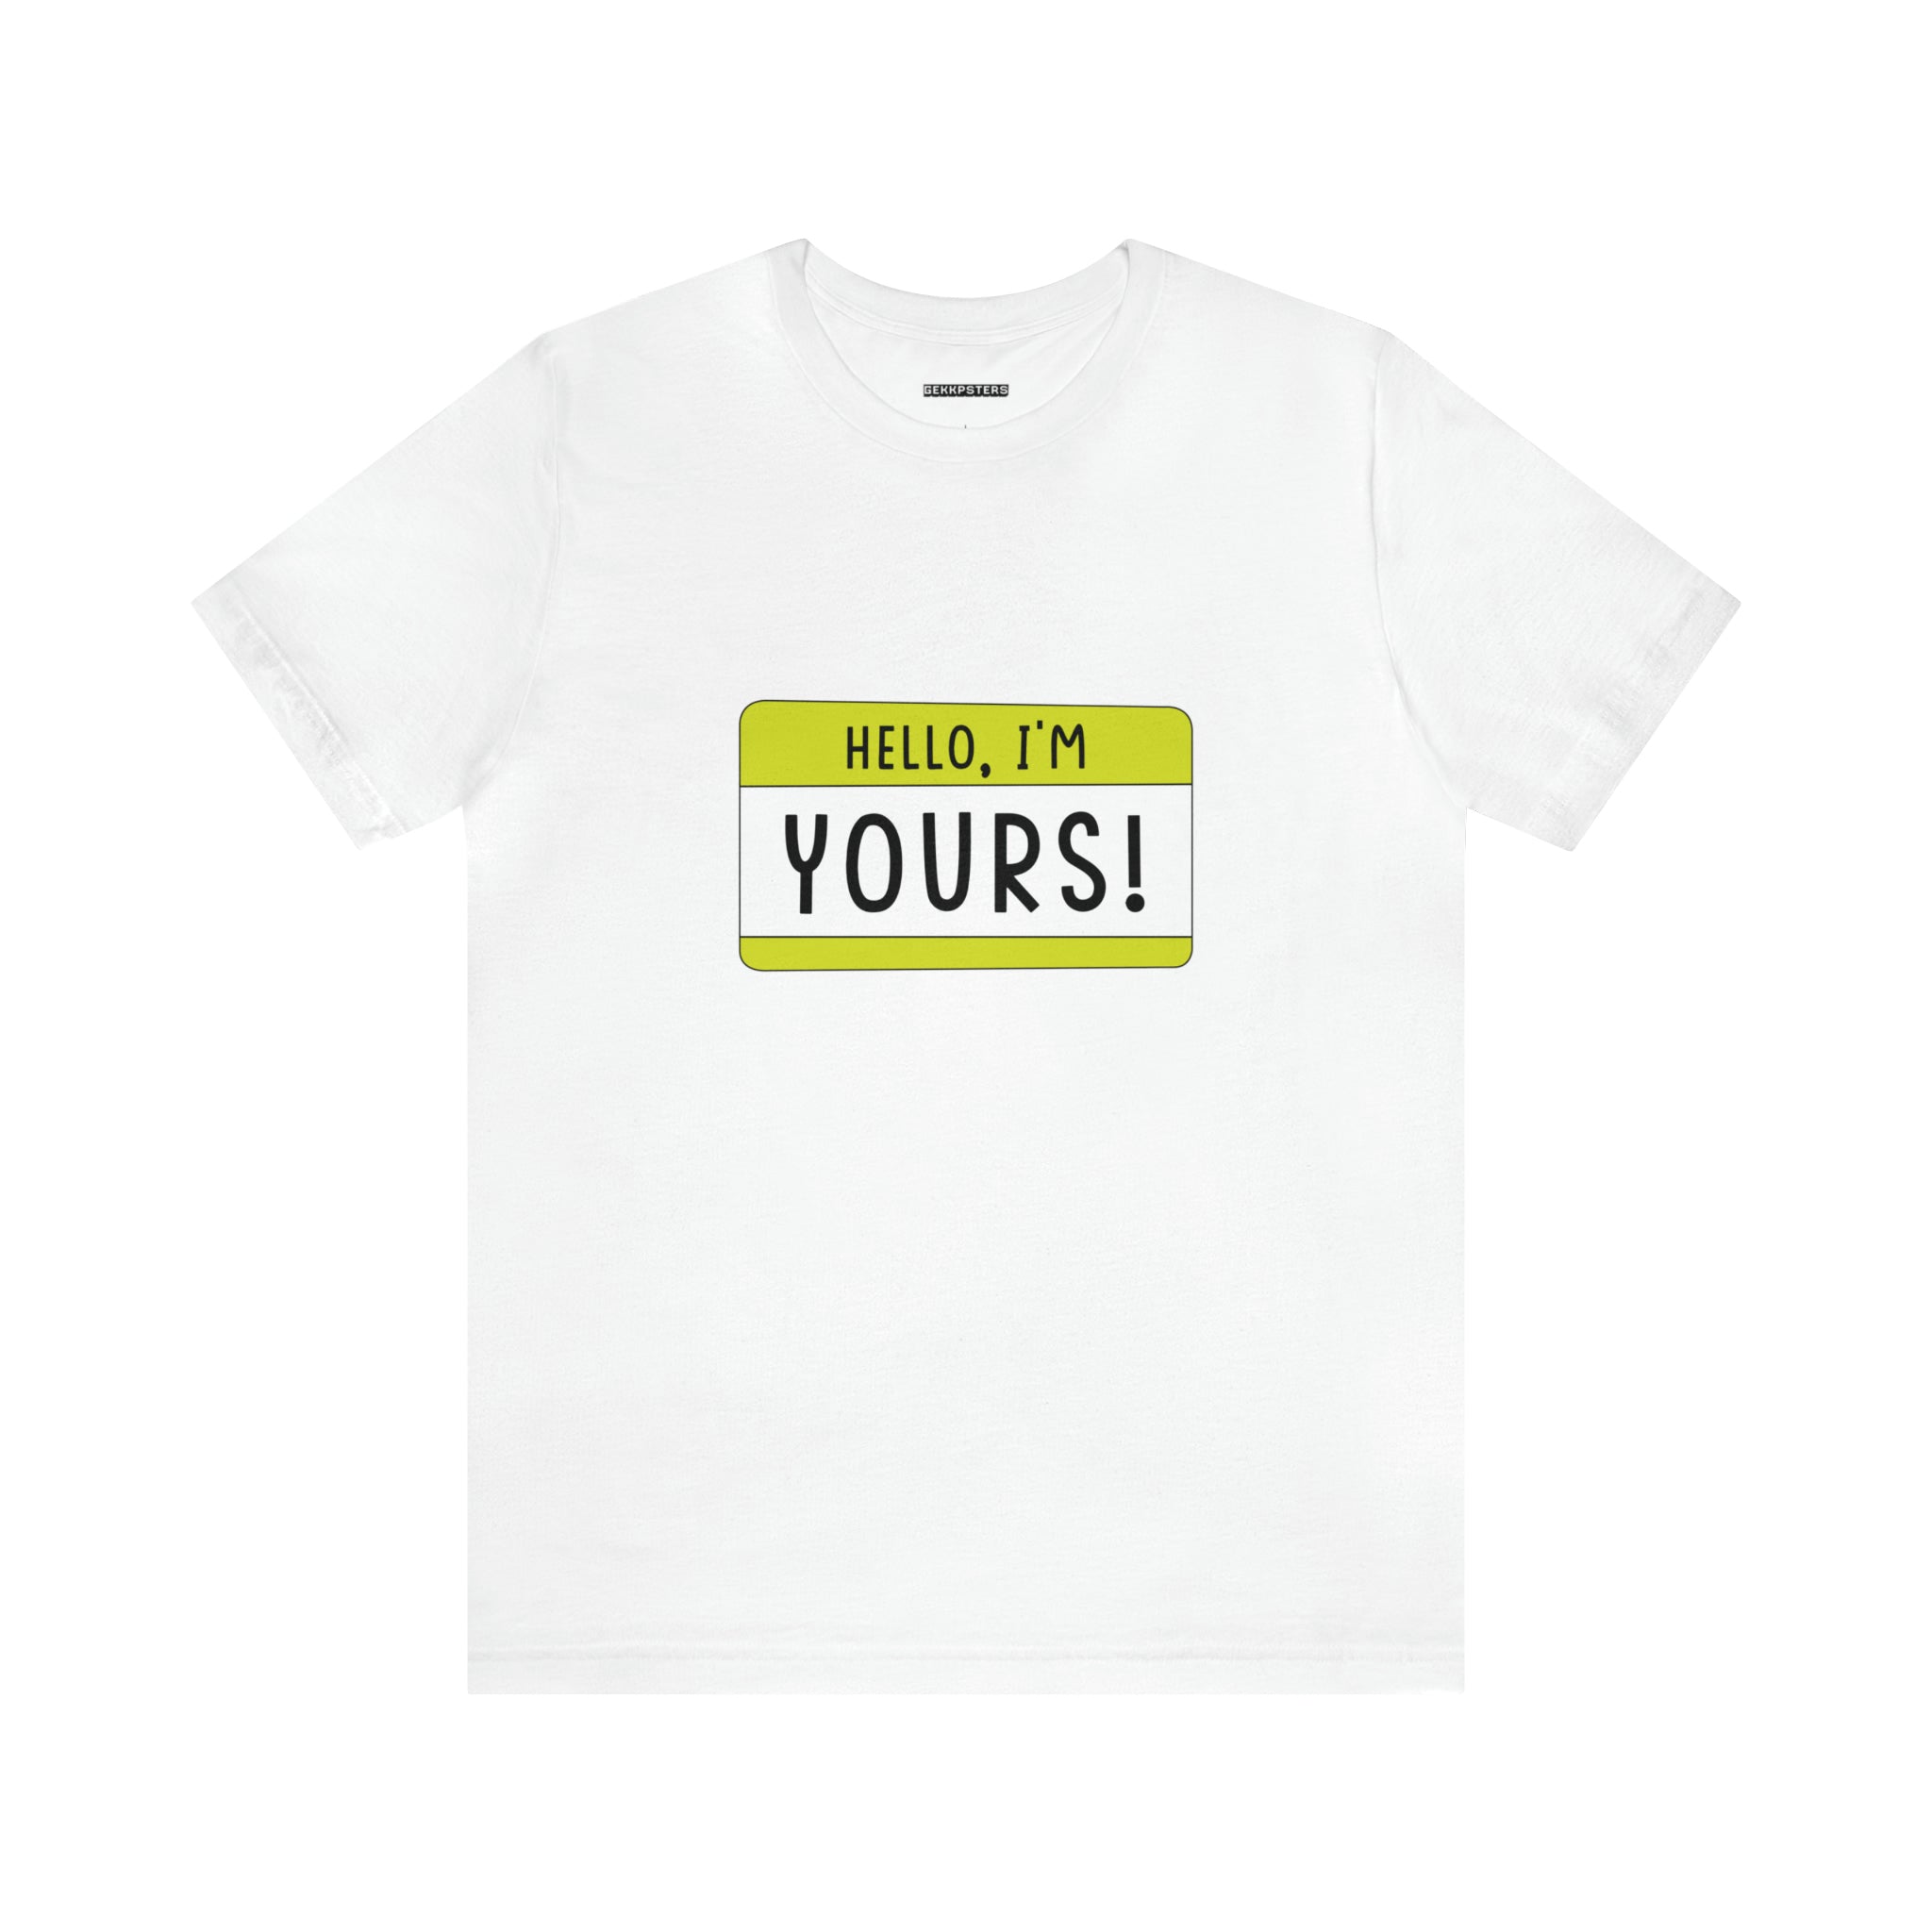 A white Hello, I'm YOURS T-Shirt with a yellow name tag graphic that reads "hello, I'm yours!" on the chest area, perfect for any geeky gaming enthusiast.